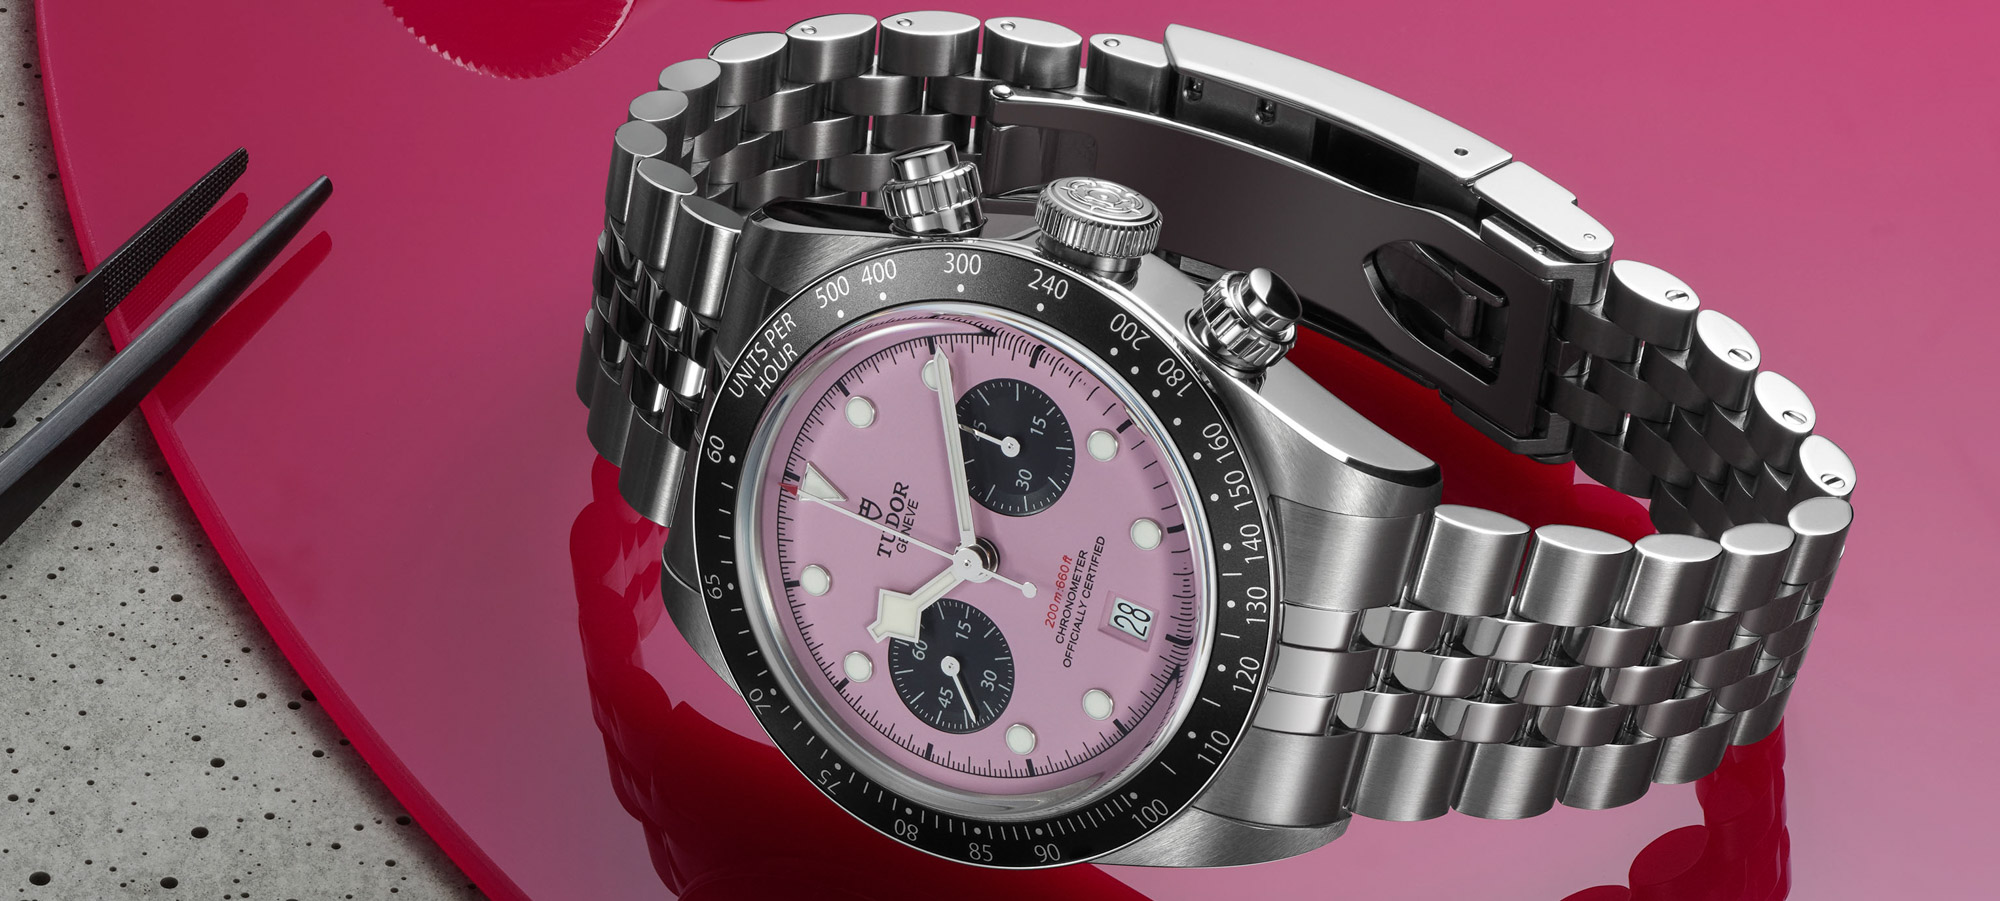 New Release: Tudor Black Bay Chrono Pink Dial Watch "Produced In Limited Numbers" | aBlogtoWatch